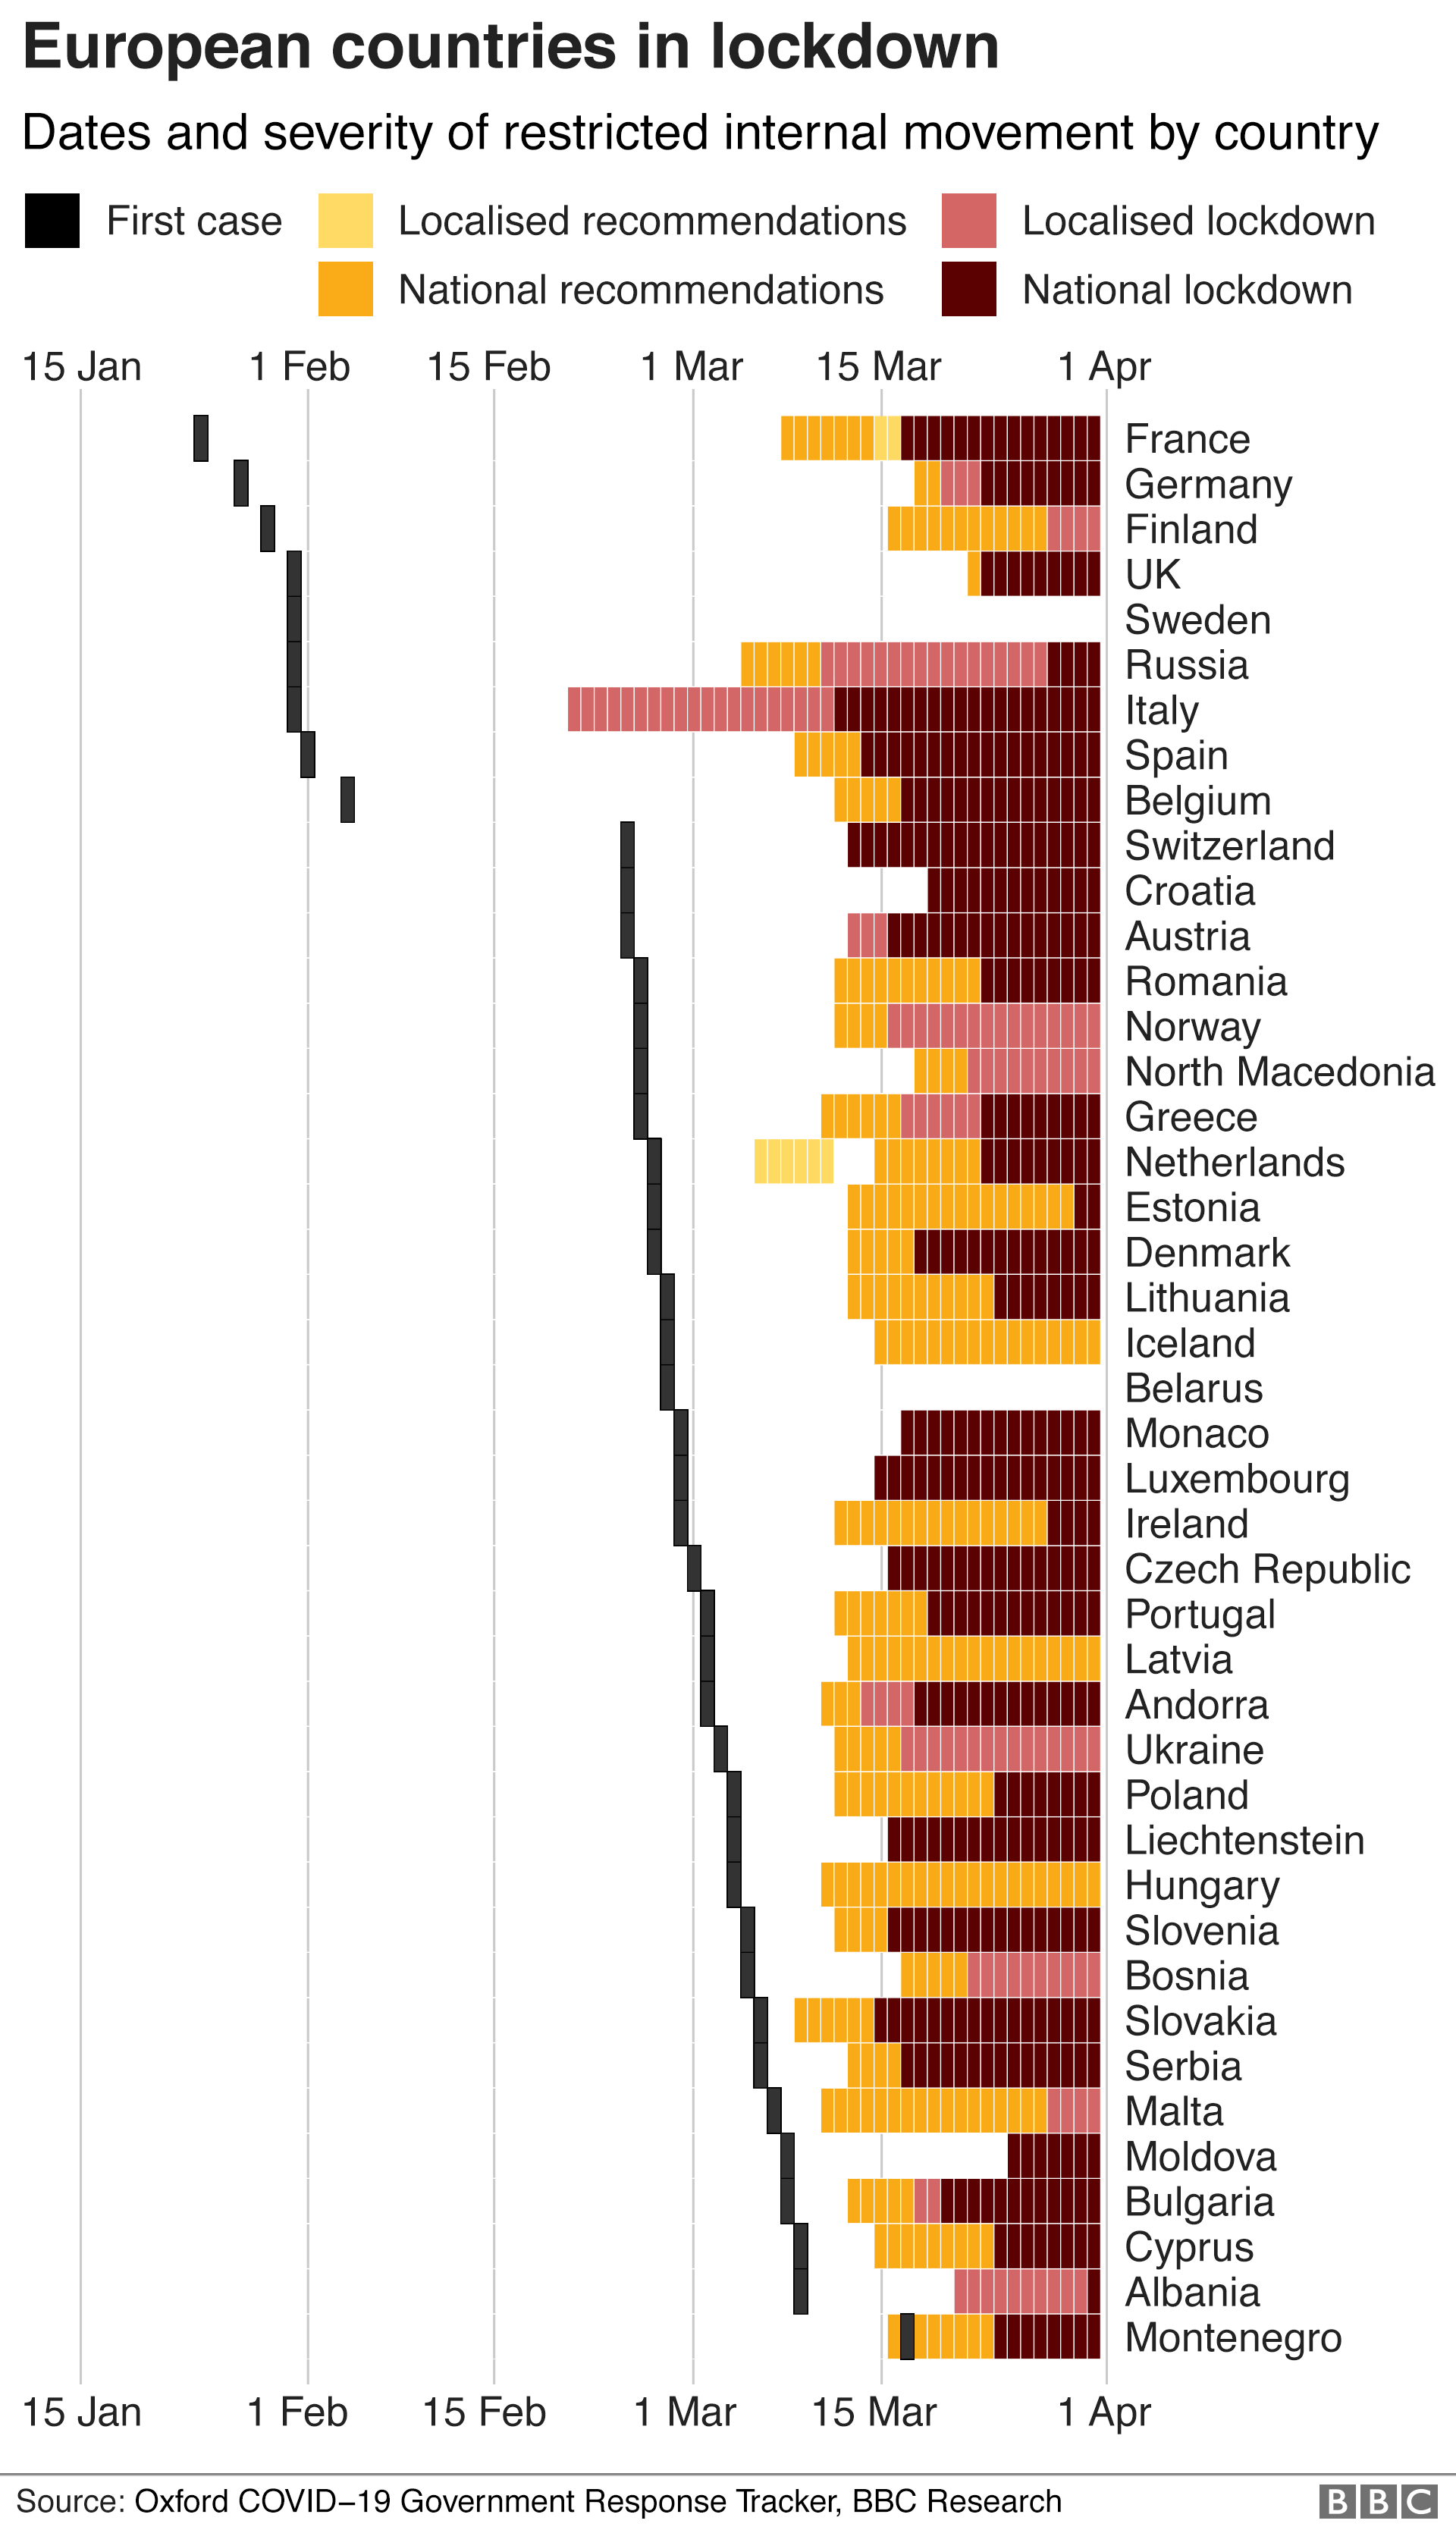 Chart showing the dates and severity of lockdown measures in Europe